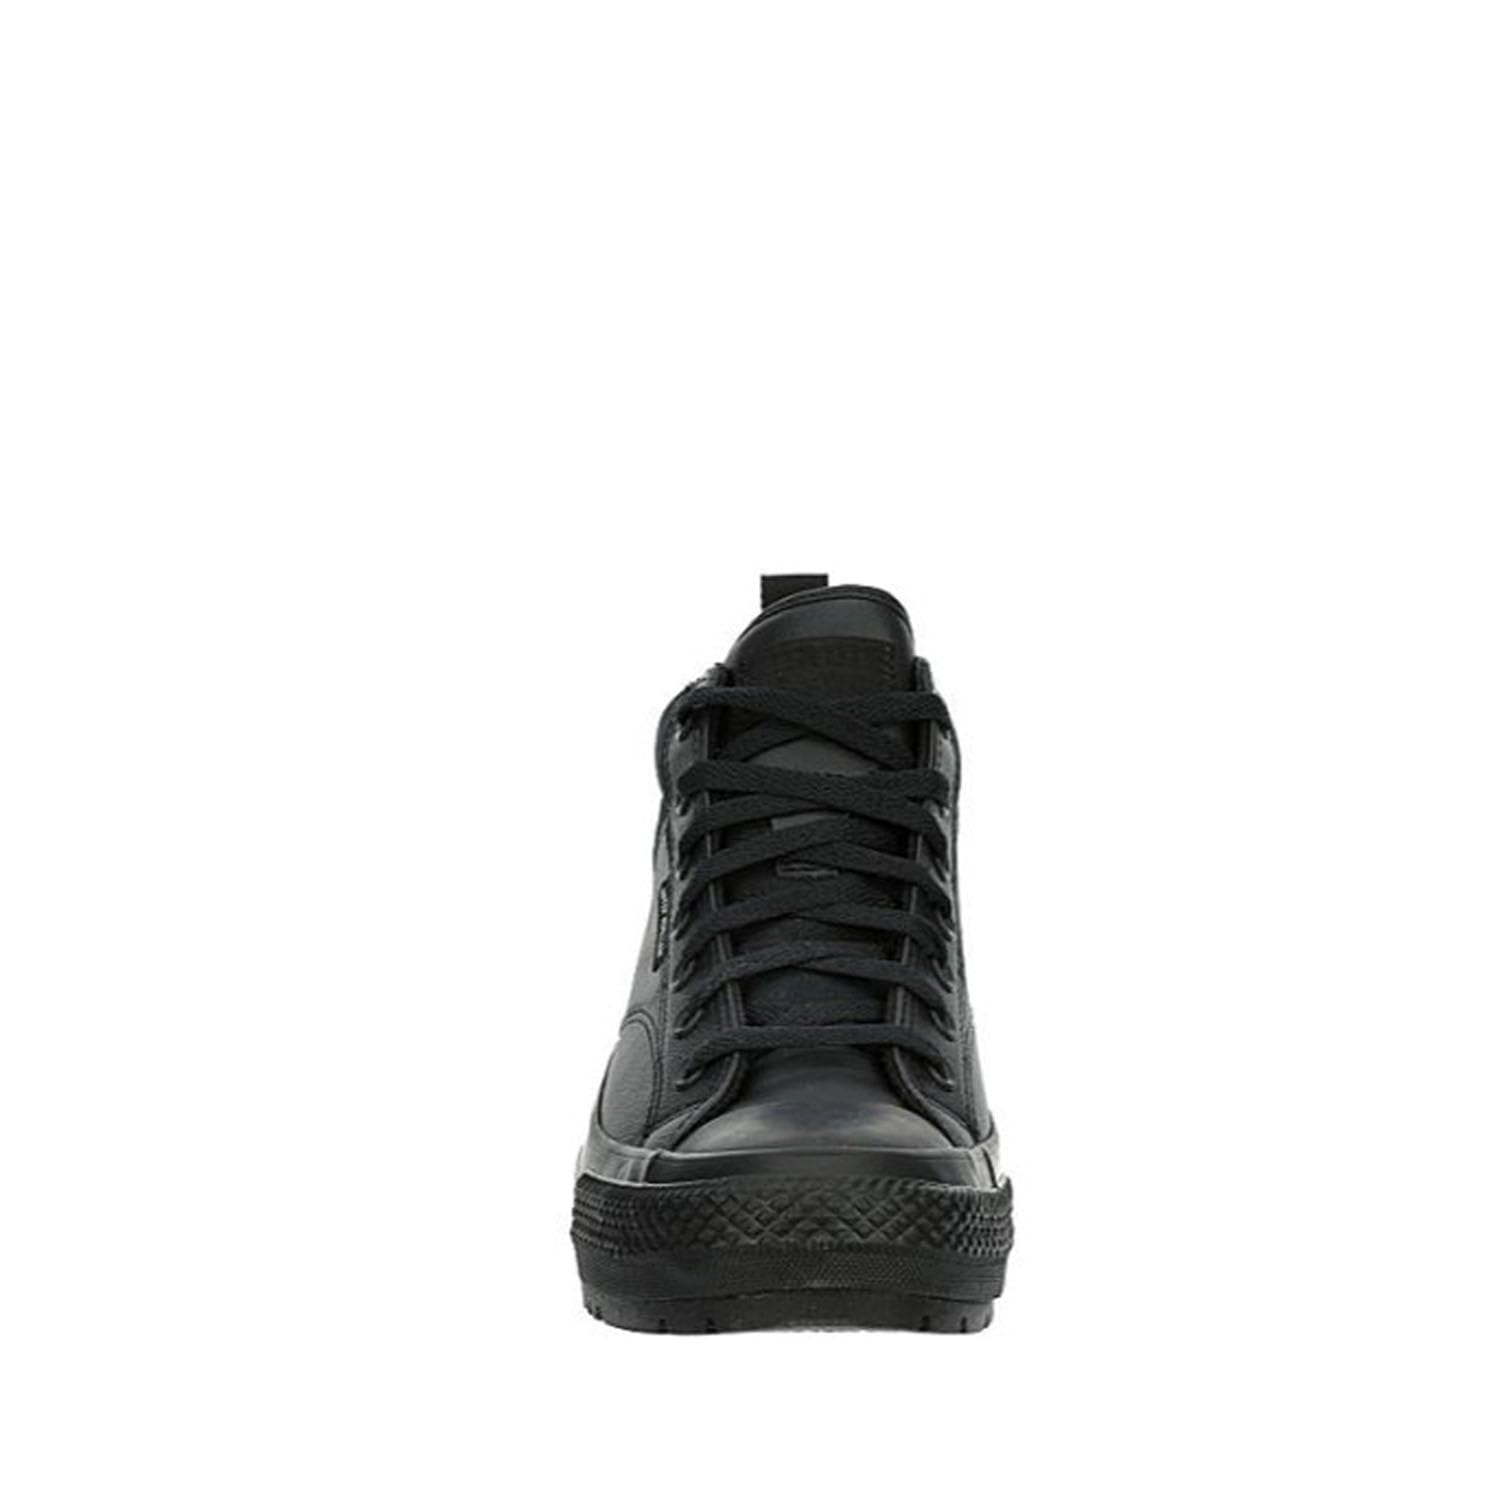 Converse Unisex Chuck Taylor All Star Malden Street Mid High Sneaker Boot Leather - Lace up Closure Style - Black